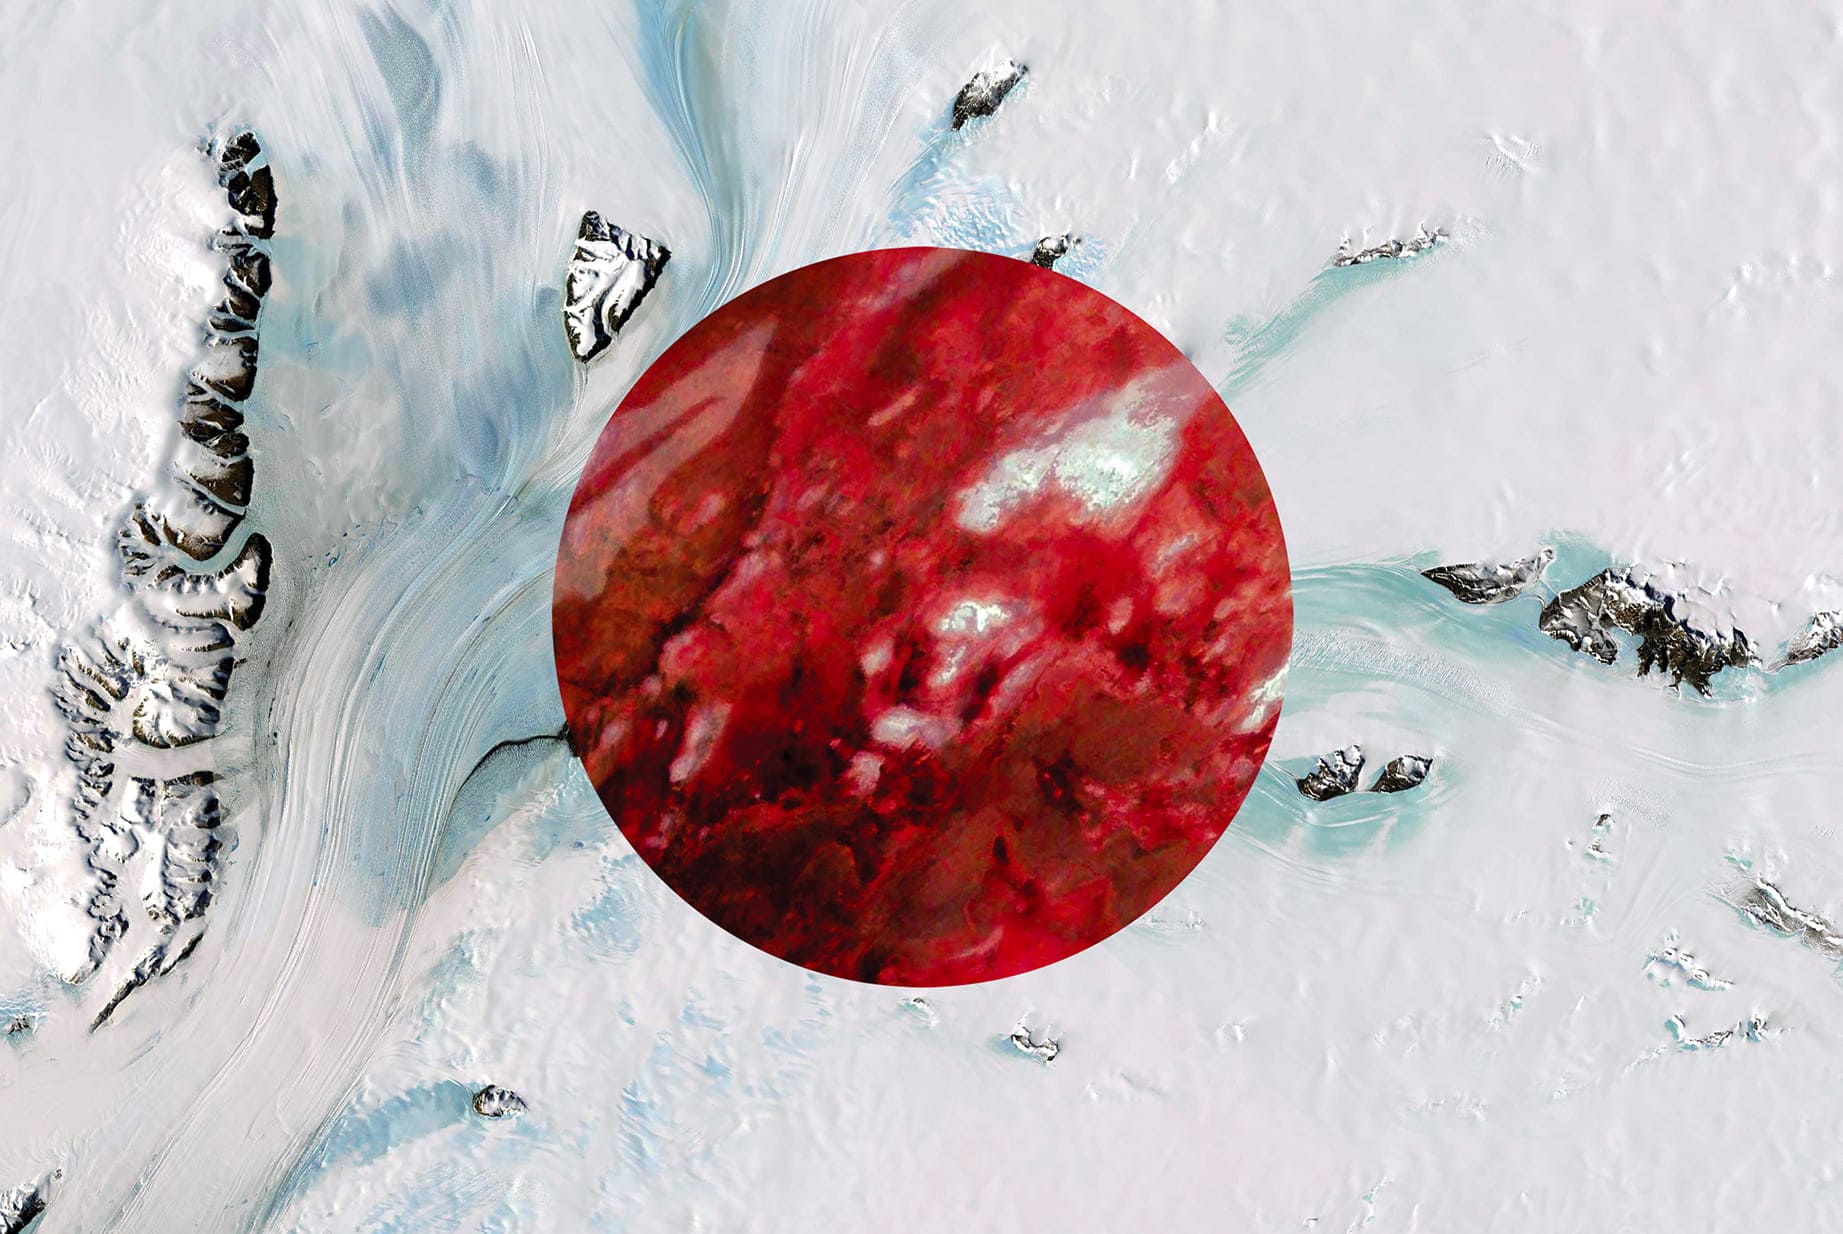 JAPAN EARTH FLAG, 2016, DIGITAL COLLAGE OF SATELLITE PHOTOGRAPHY FROM ANTARCTICA, AUSTRALIA, diasec print CM 67×100, limited edition 9